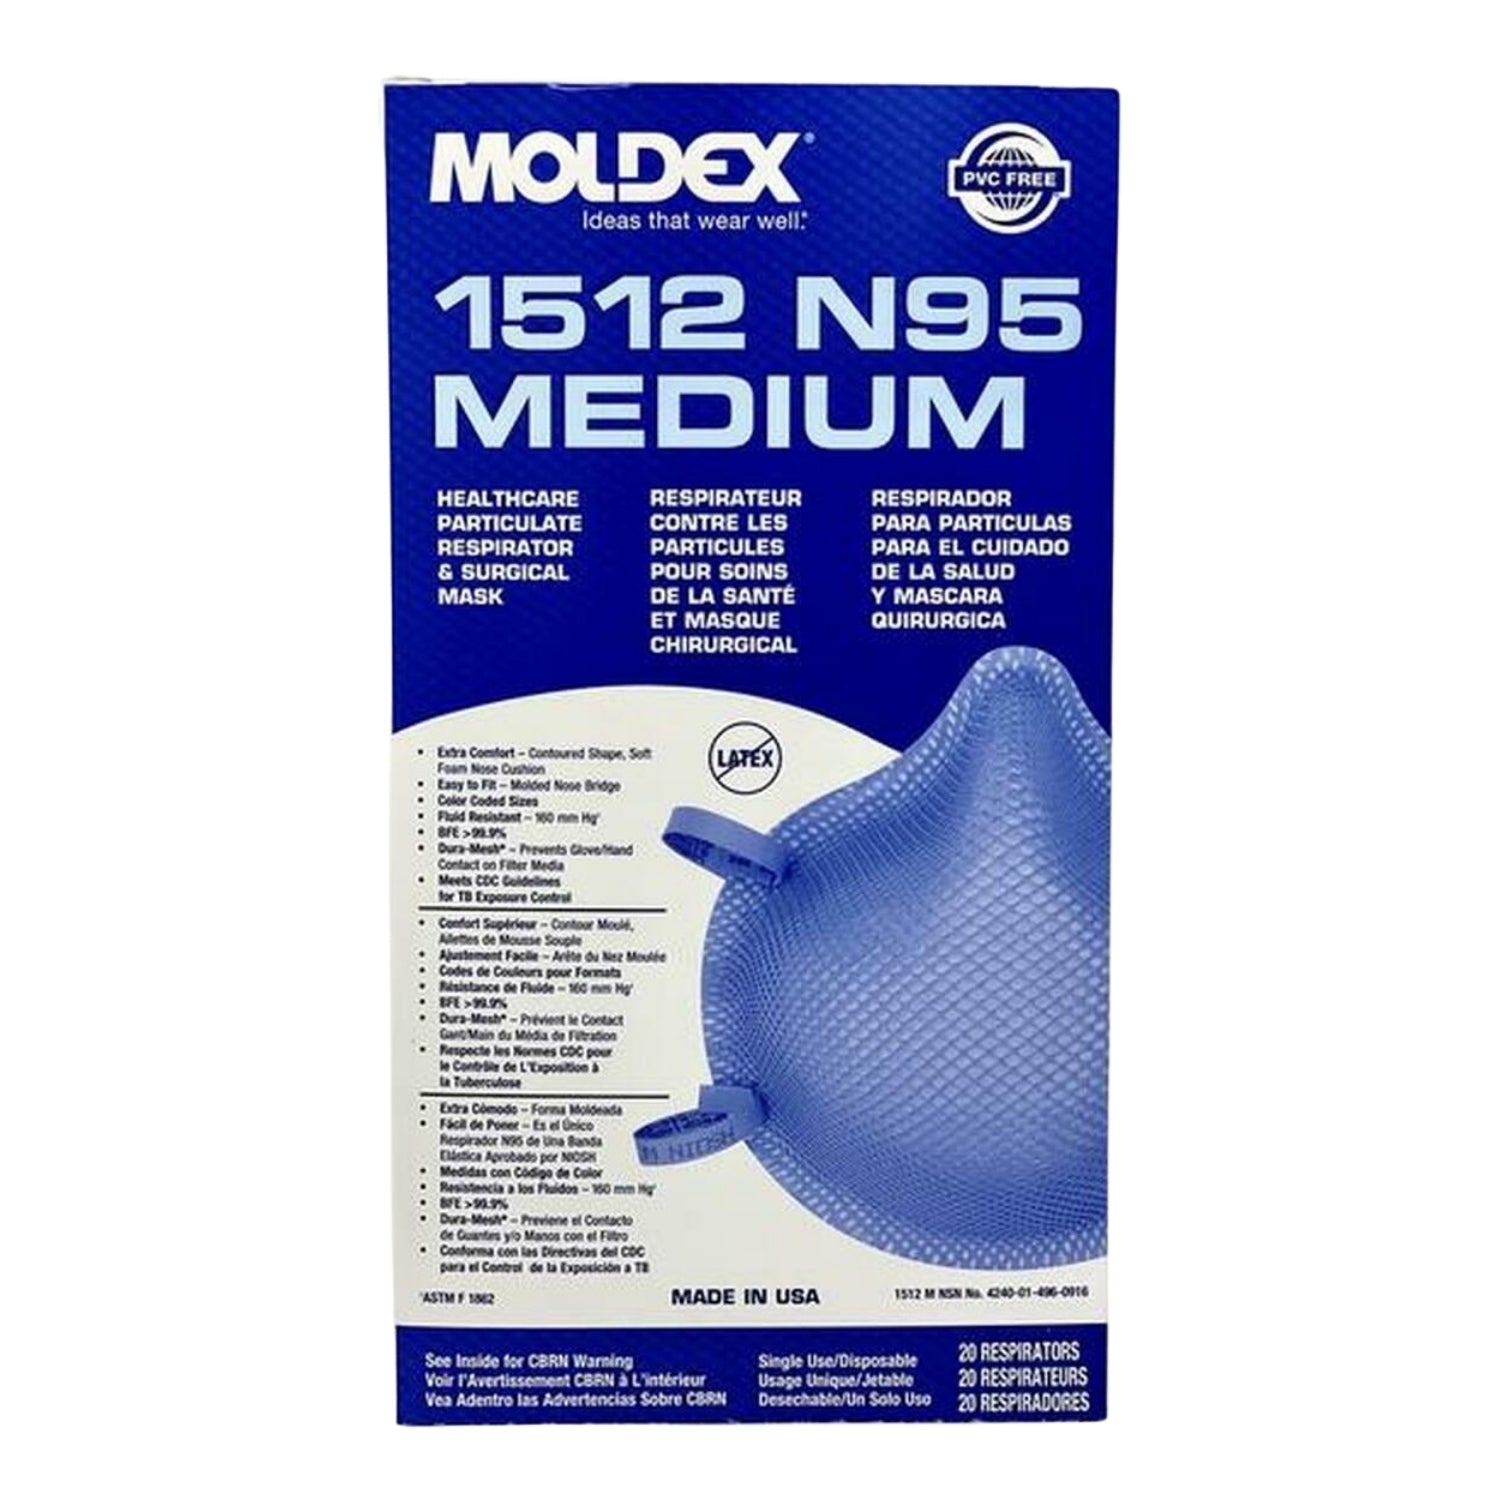 MOLDEX 1512 - N95 1500 Series Healthcare Particulate Respirators and Surgical Masks, Medium - 20/BOX